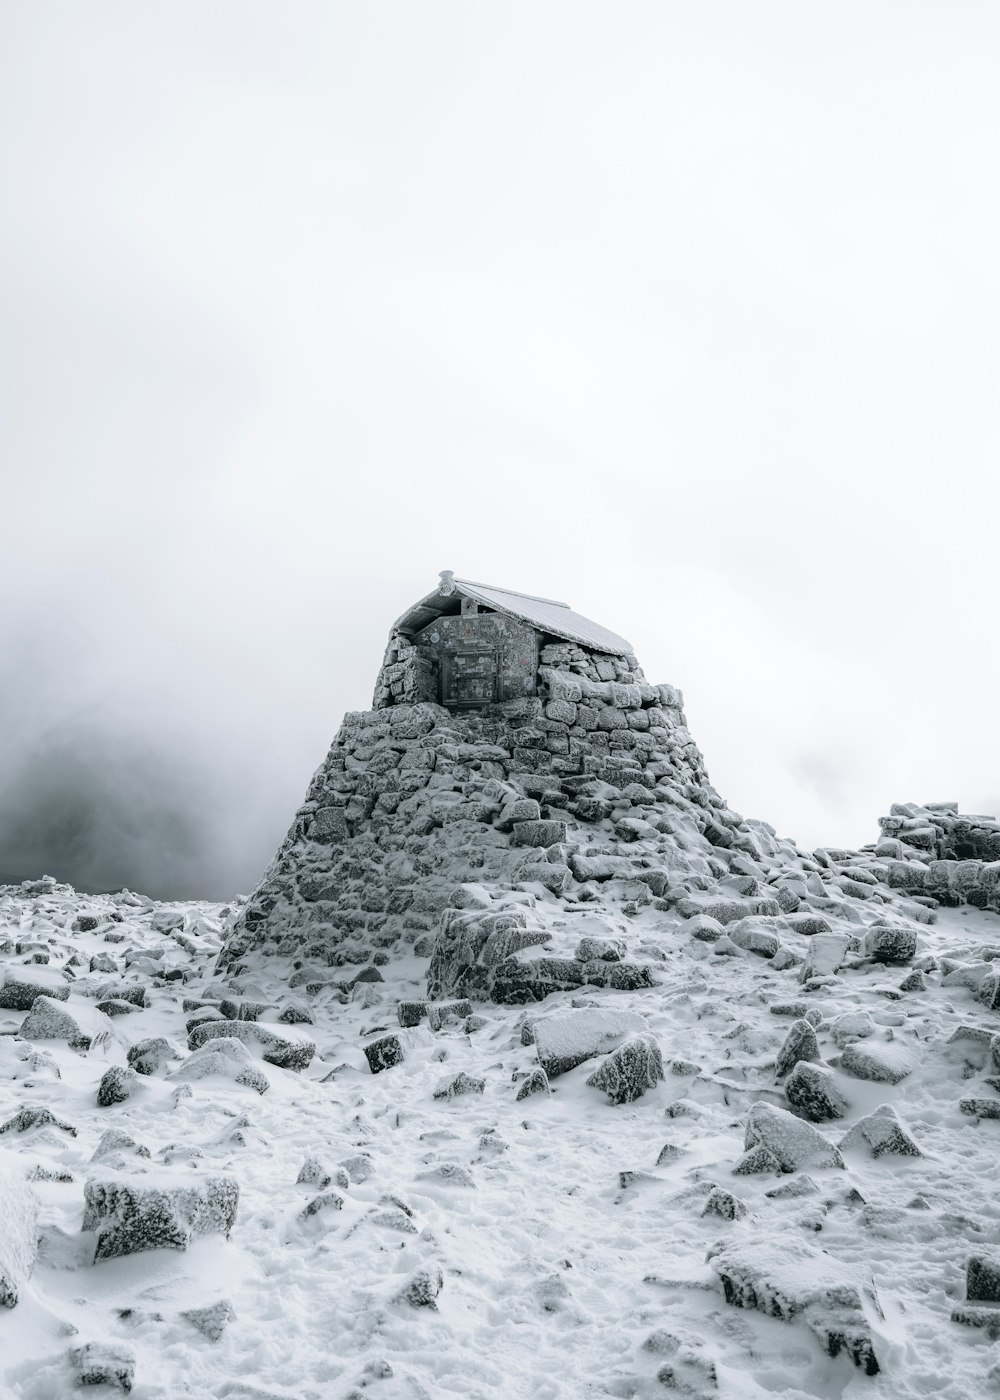 a snowy mountain with a small structure on top of it